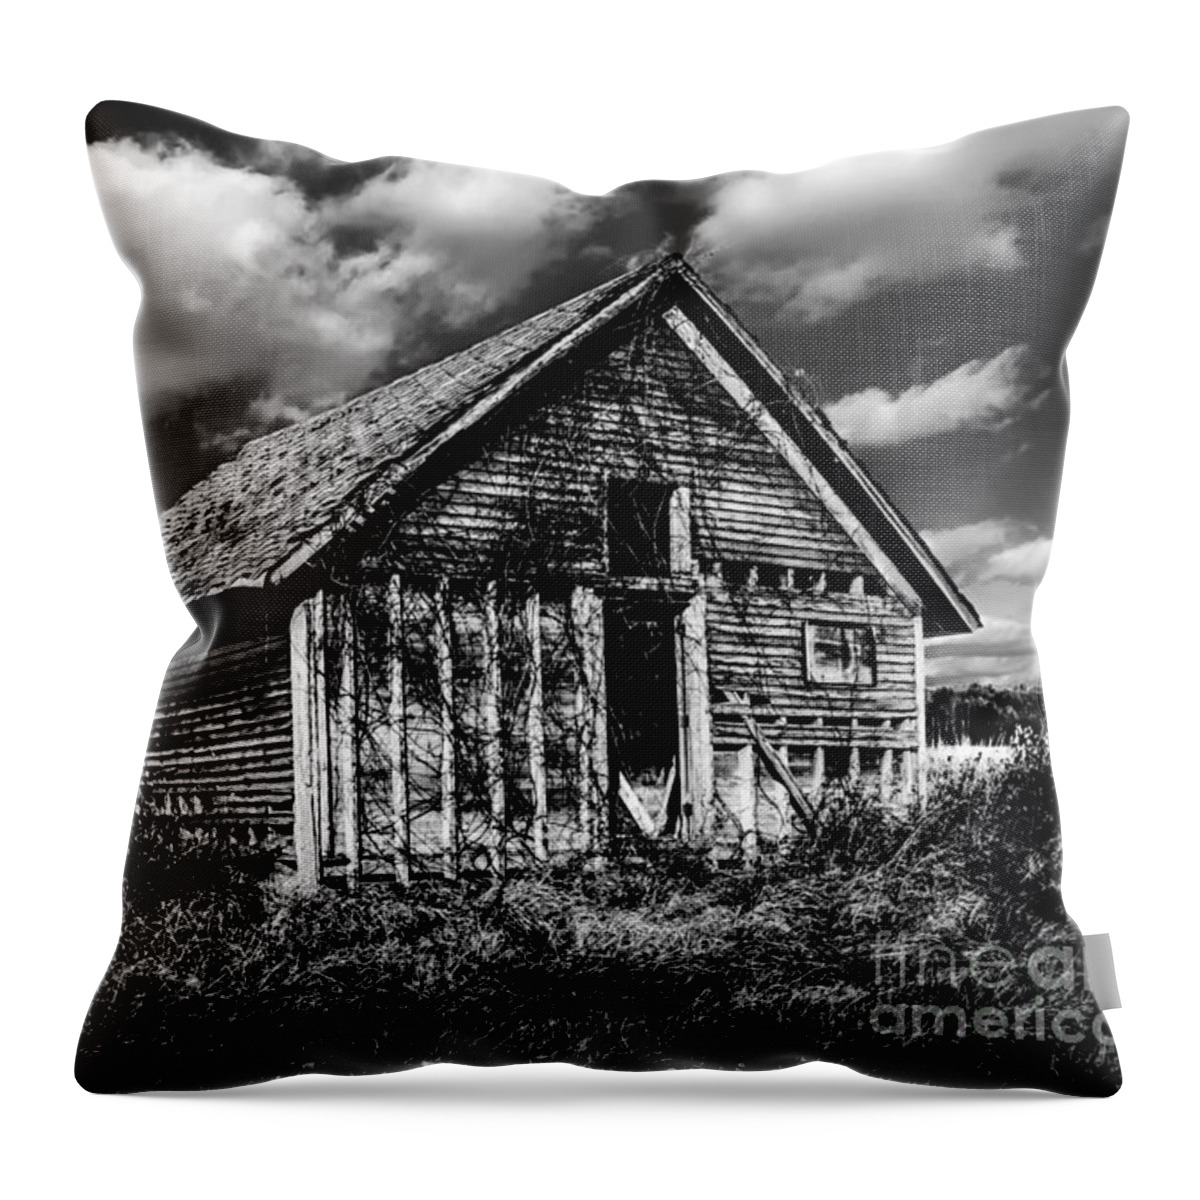 Barn Throw Pillow featuring the photograph Gone With The Weeds by Michael Arend